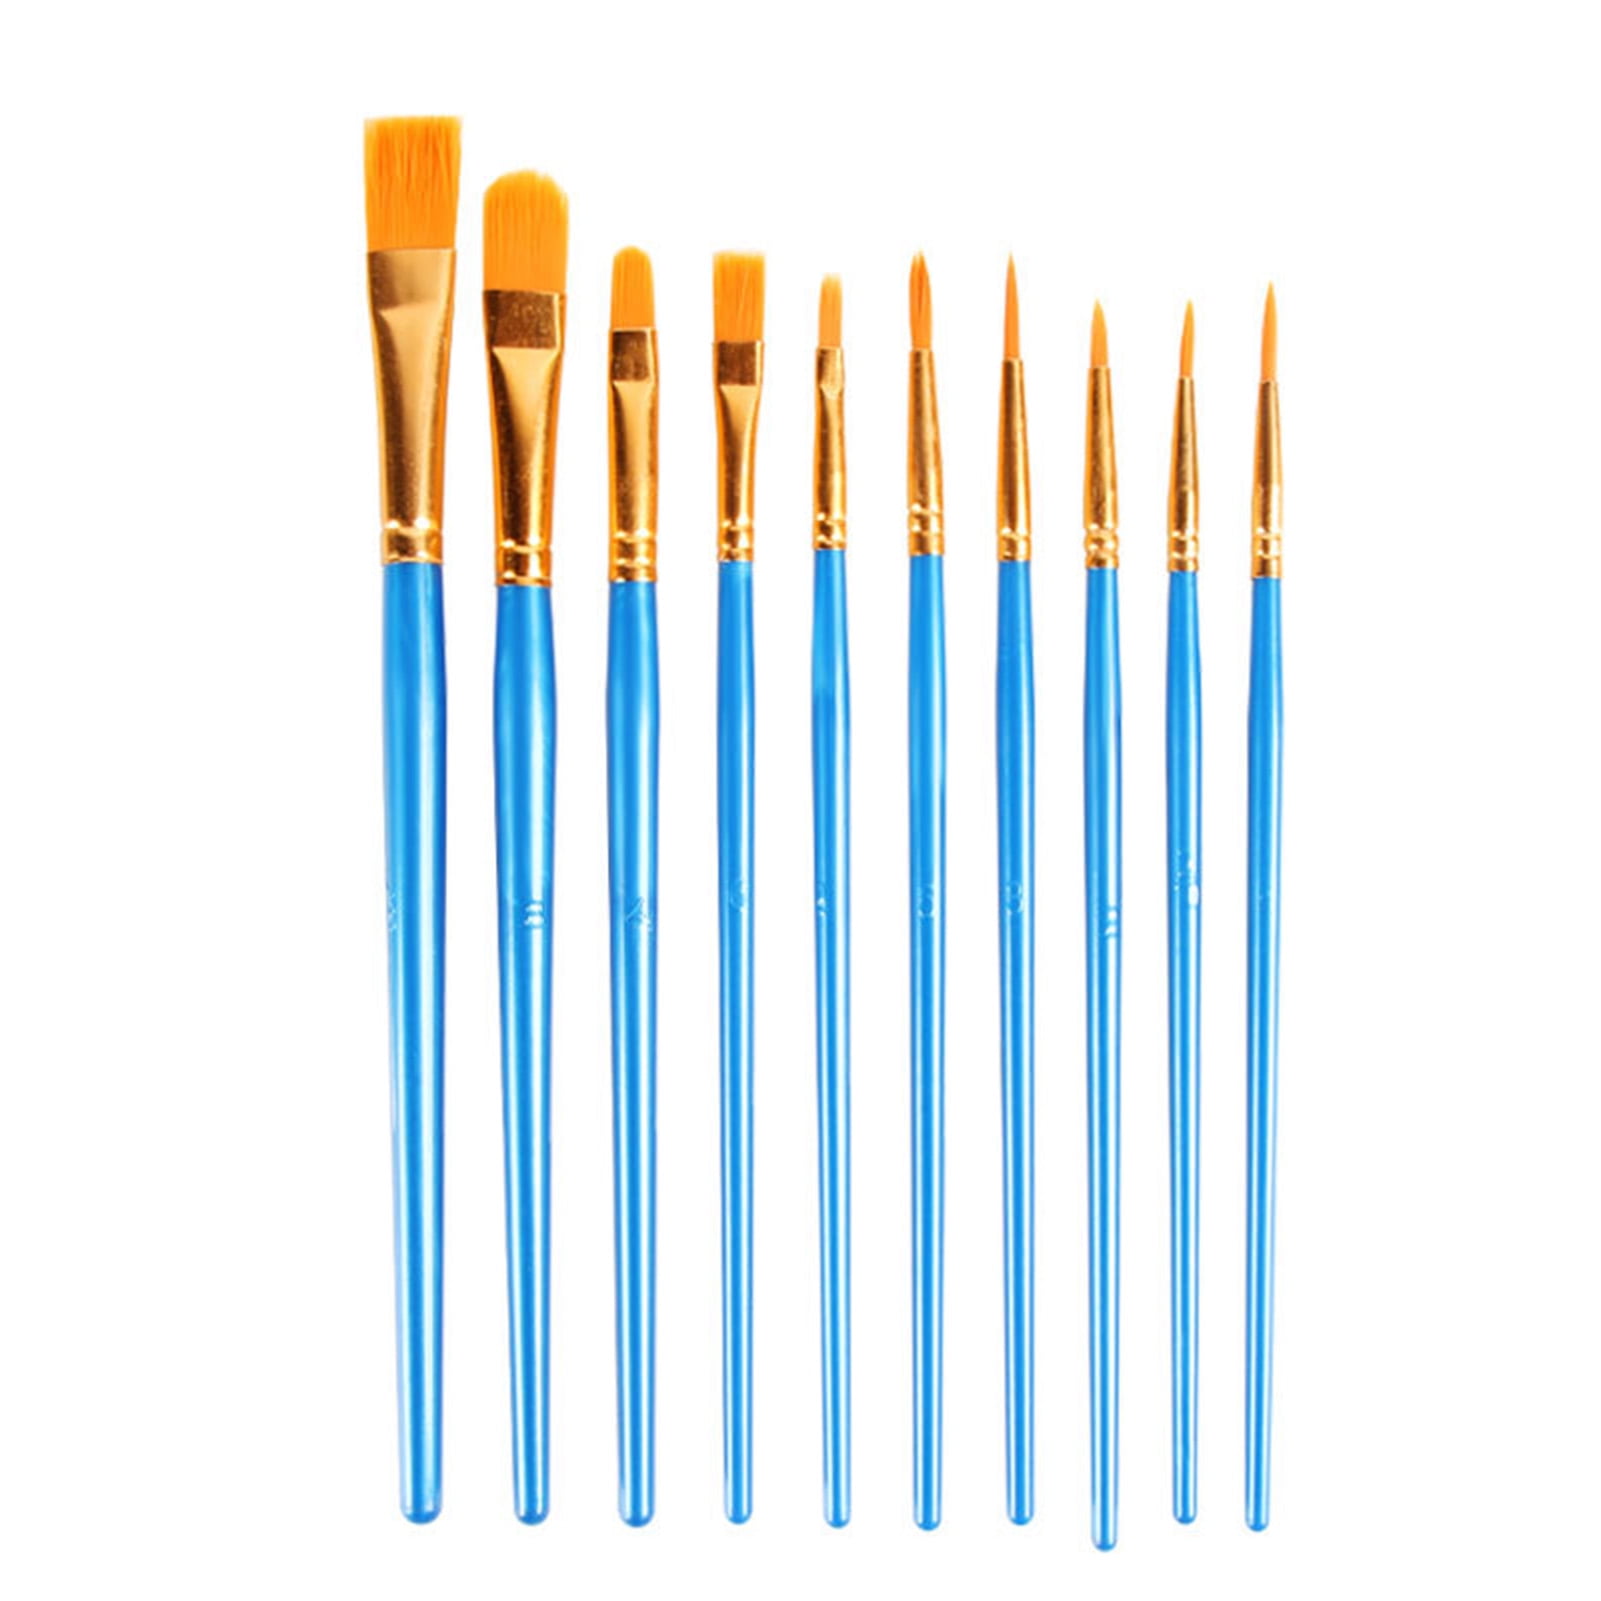 GETHPEN Artist Paint Brush Set of 14 - Paint Brushes for Acrylic Painting,  Canvas, Watercolor or Fabric - Painting Art Supplies for Beginners and